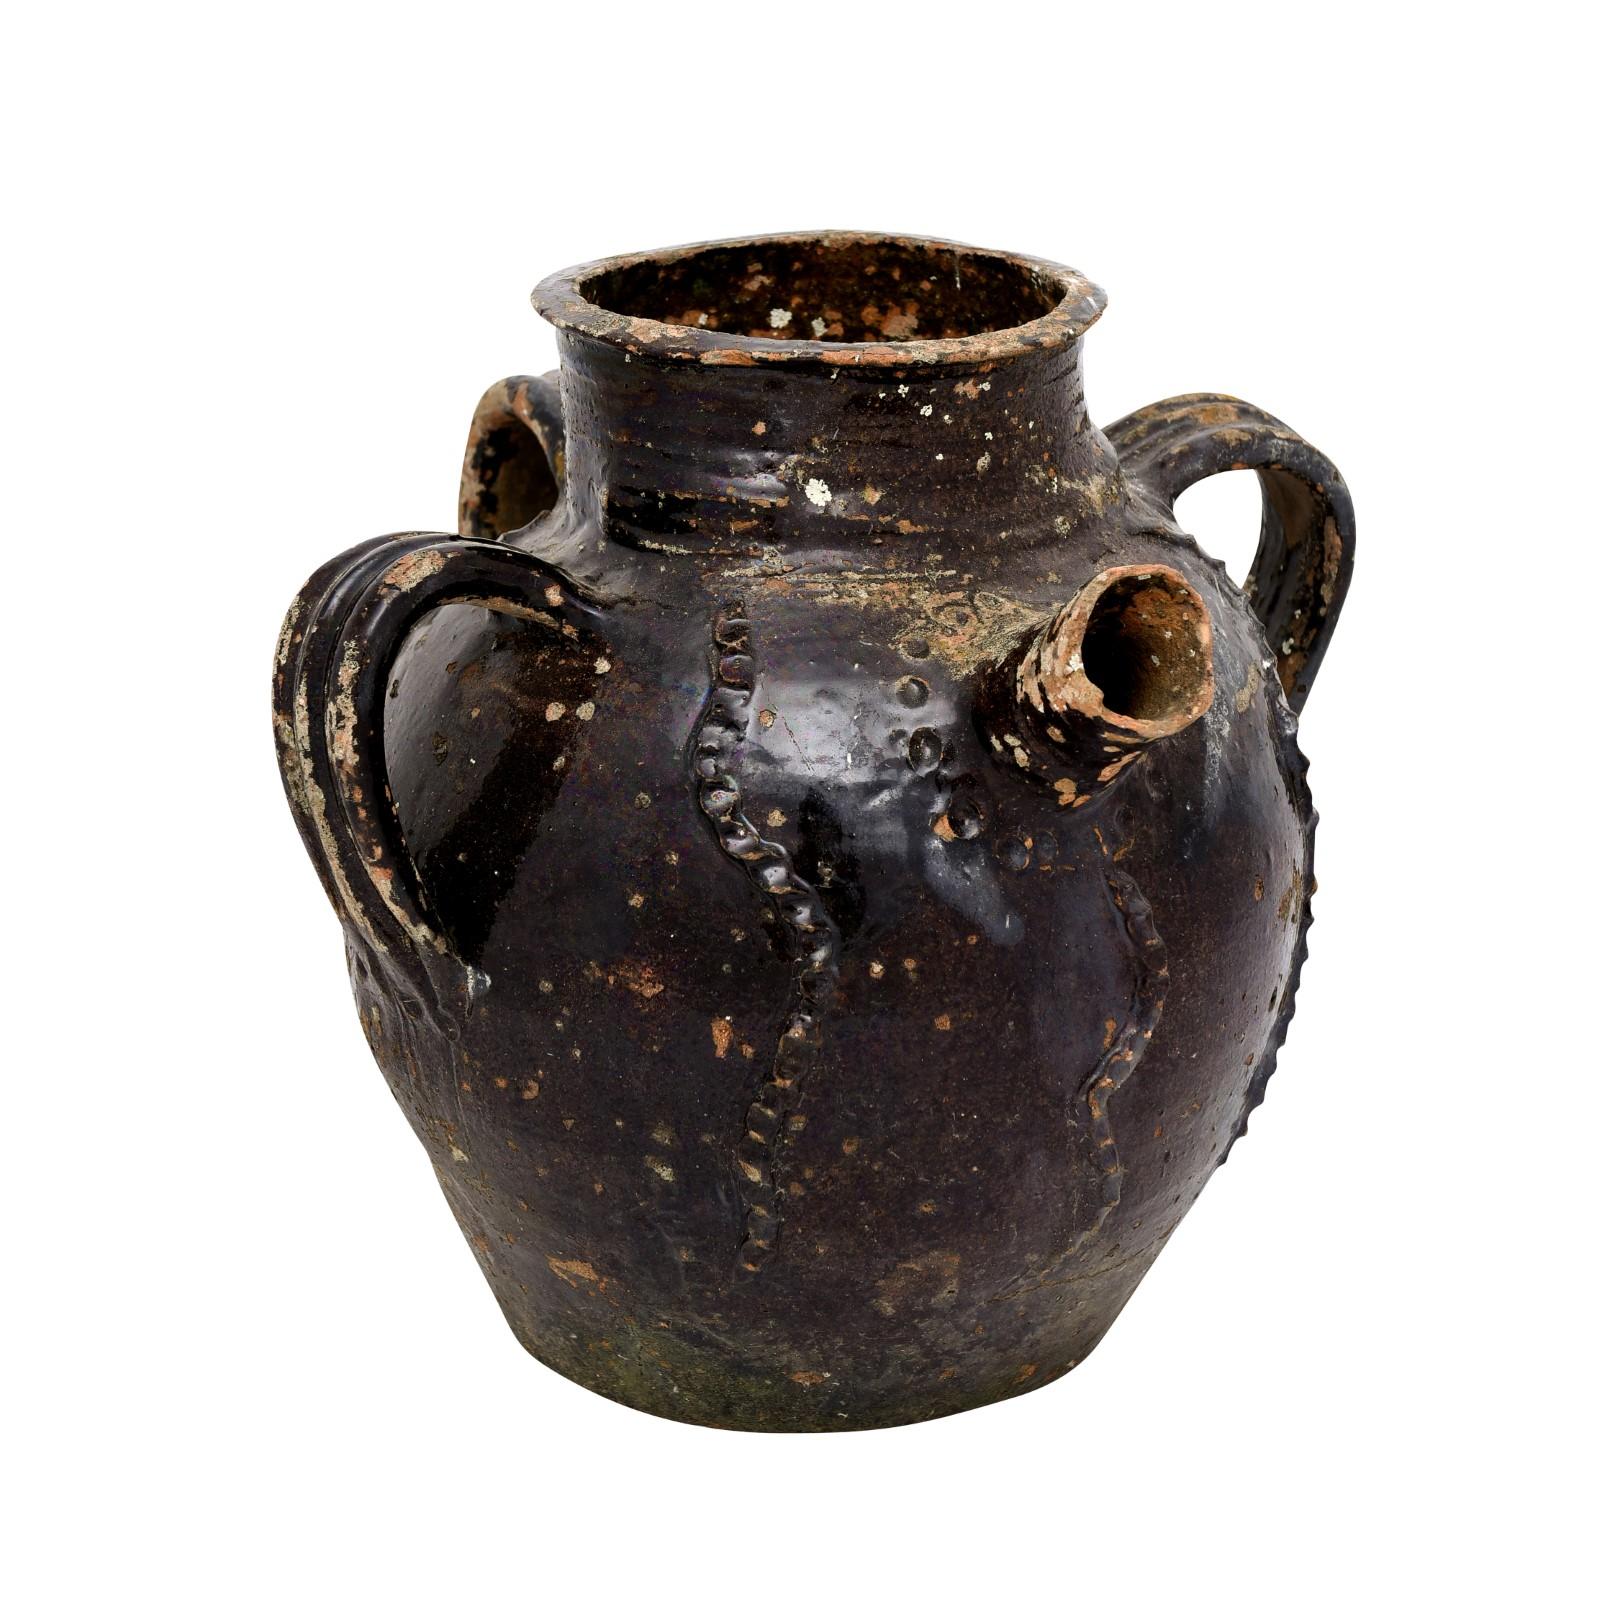 A French Provincial glazed pottery pouring jug from the 19th century, with single spout, three handles and great rustic character. Created in southern France during the 19th century, this pottery jug attracts our attention with its interesting